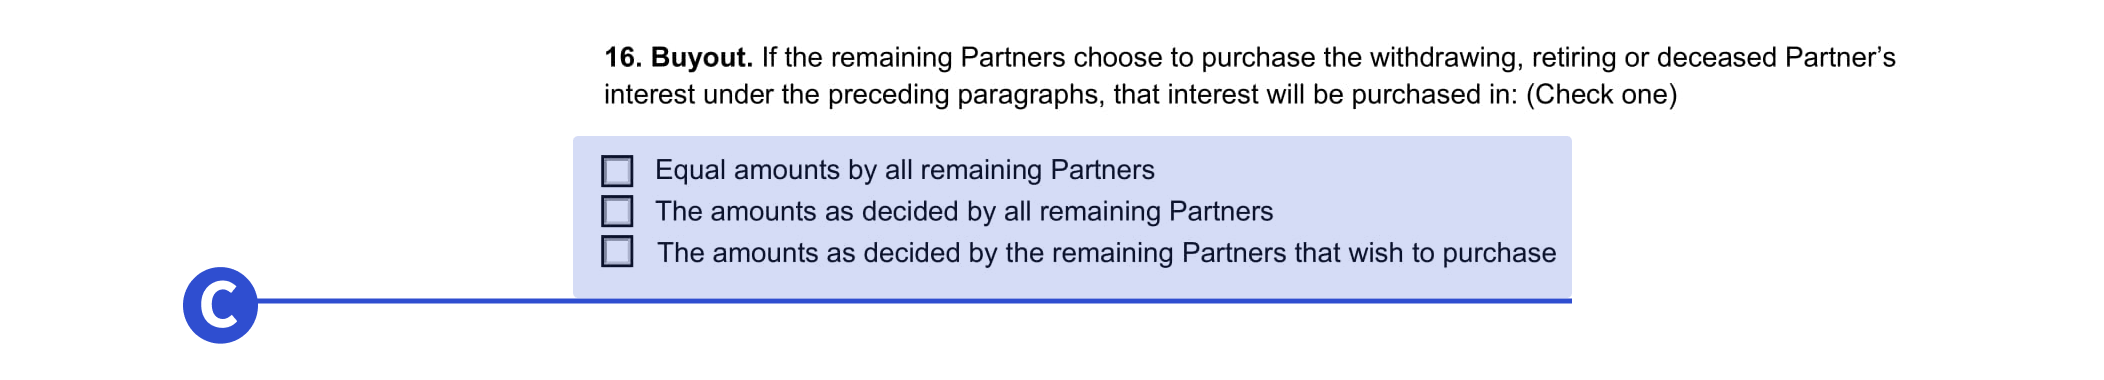 An example of where to detail buyout information in our 50-50 partnership agreement template.